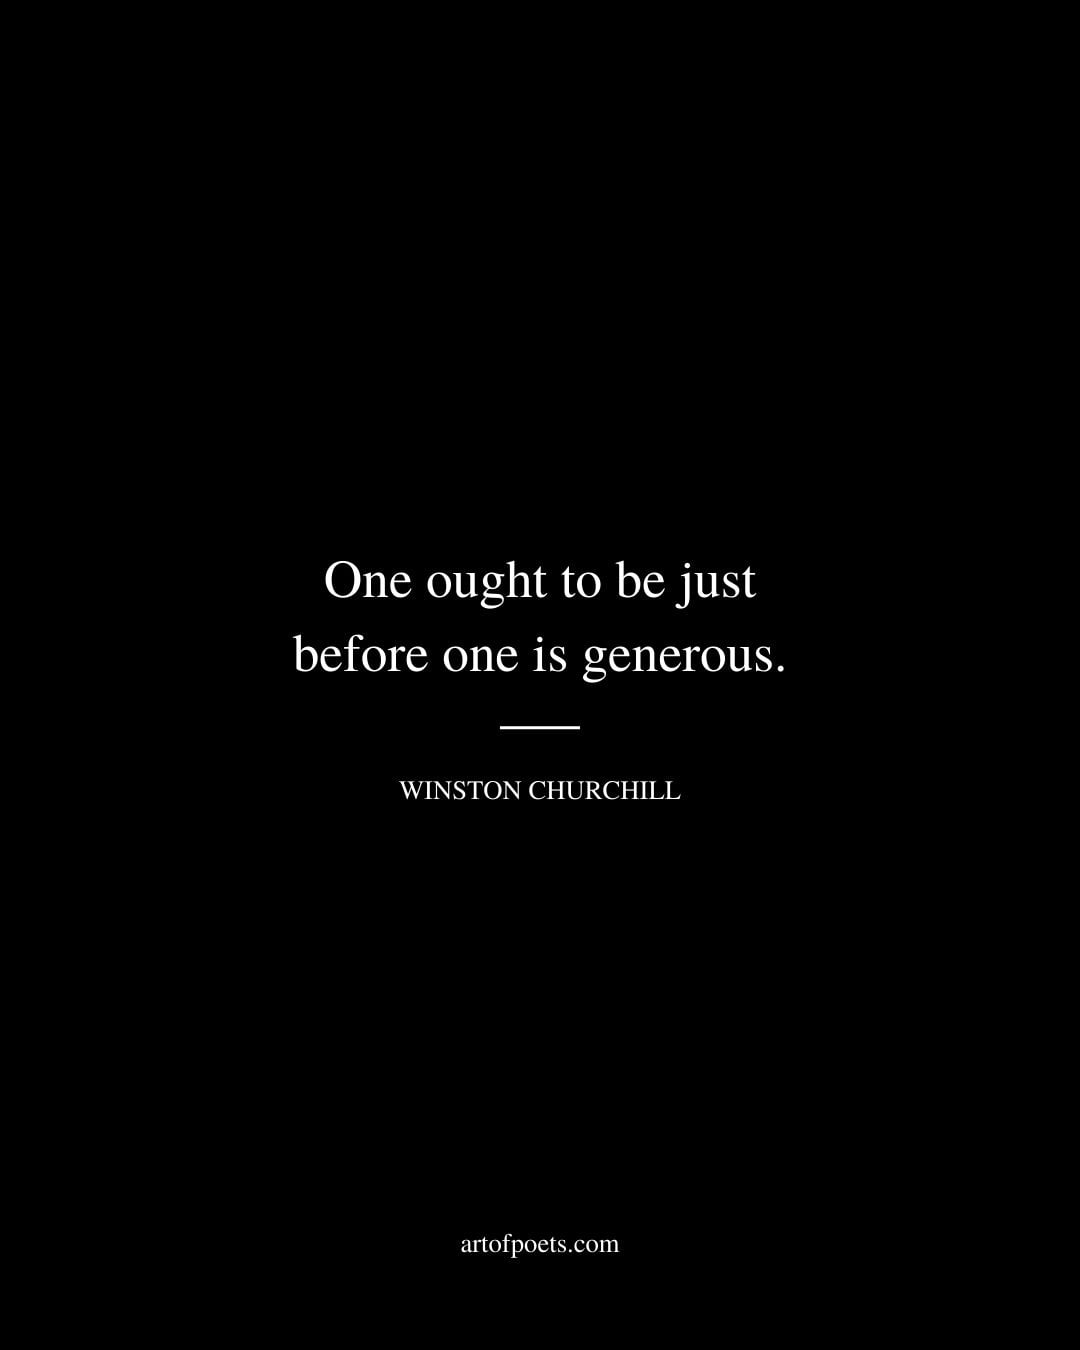 One ought to be just before one is generous